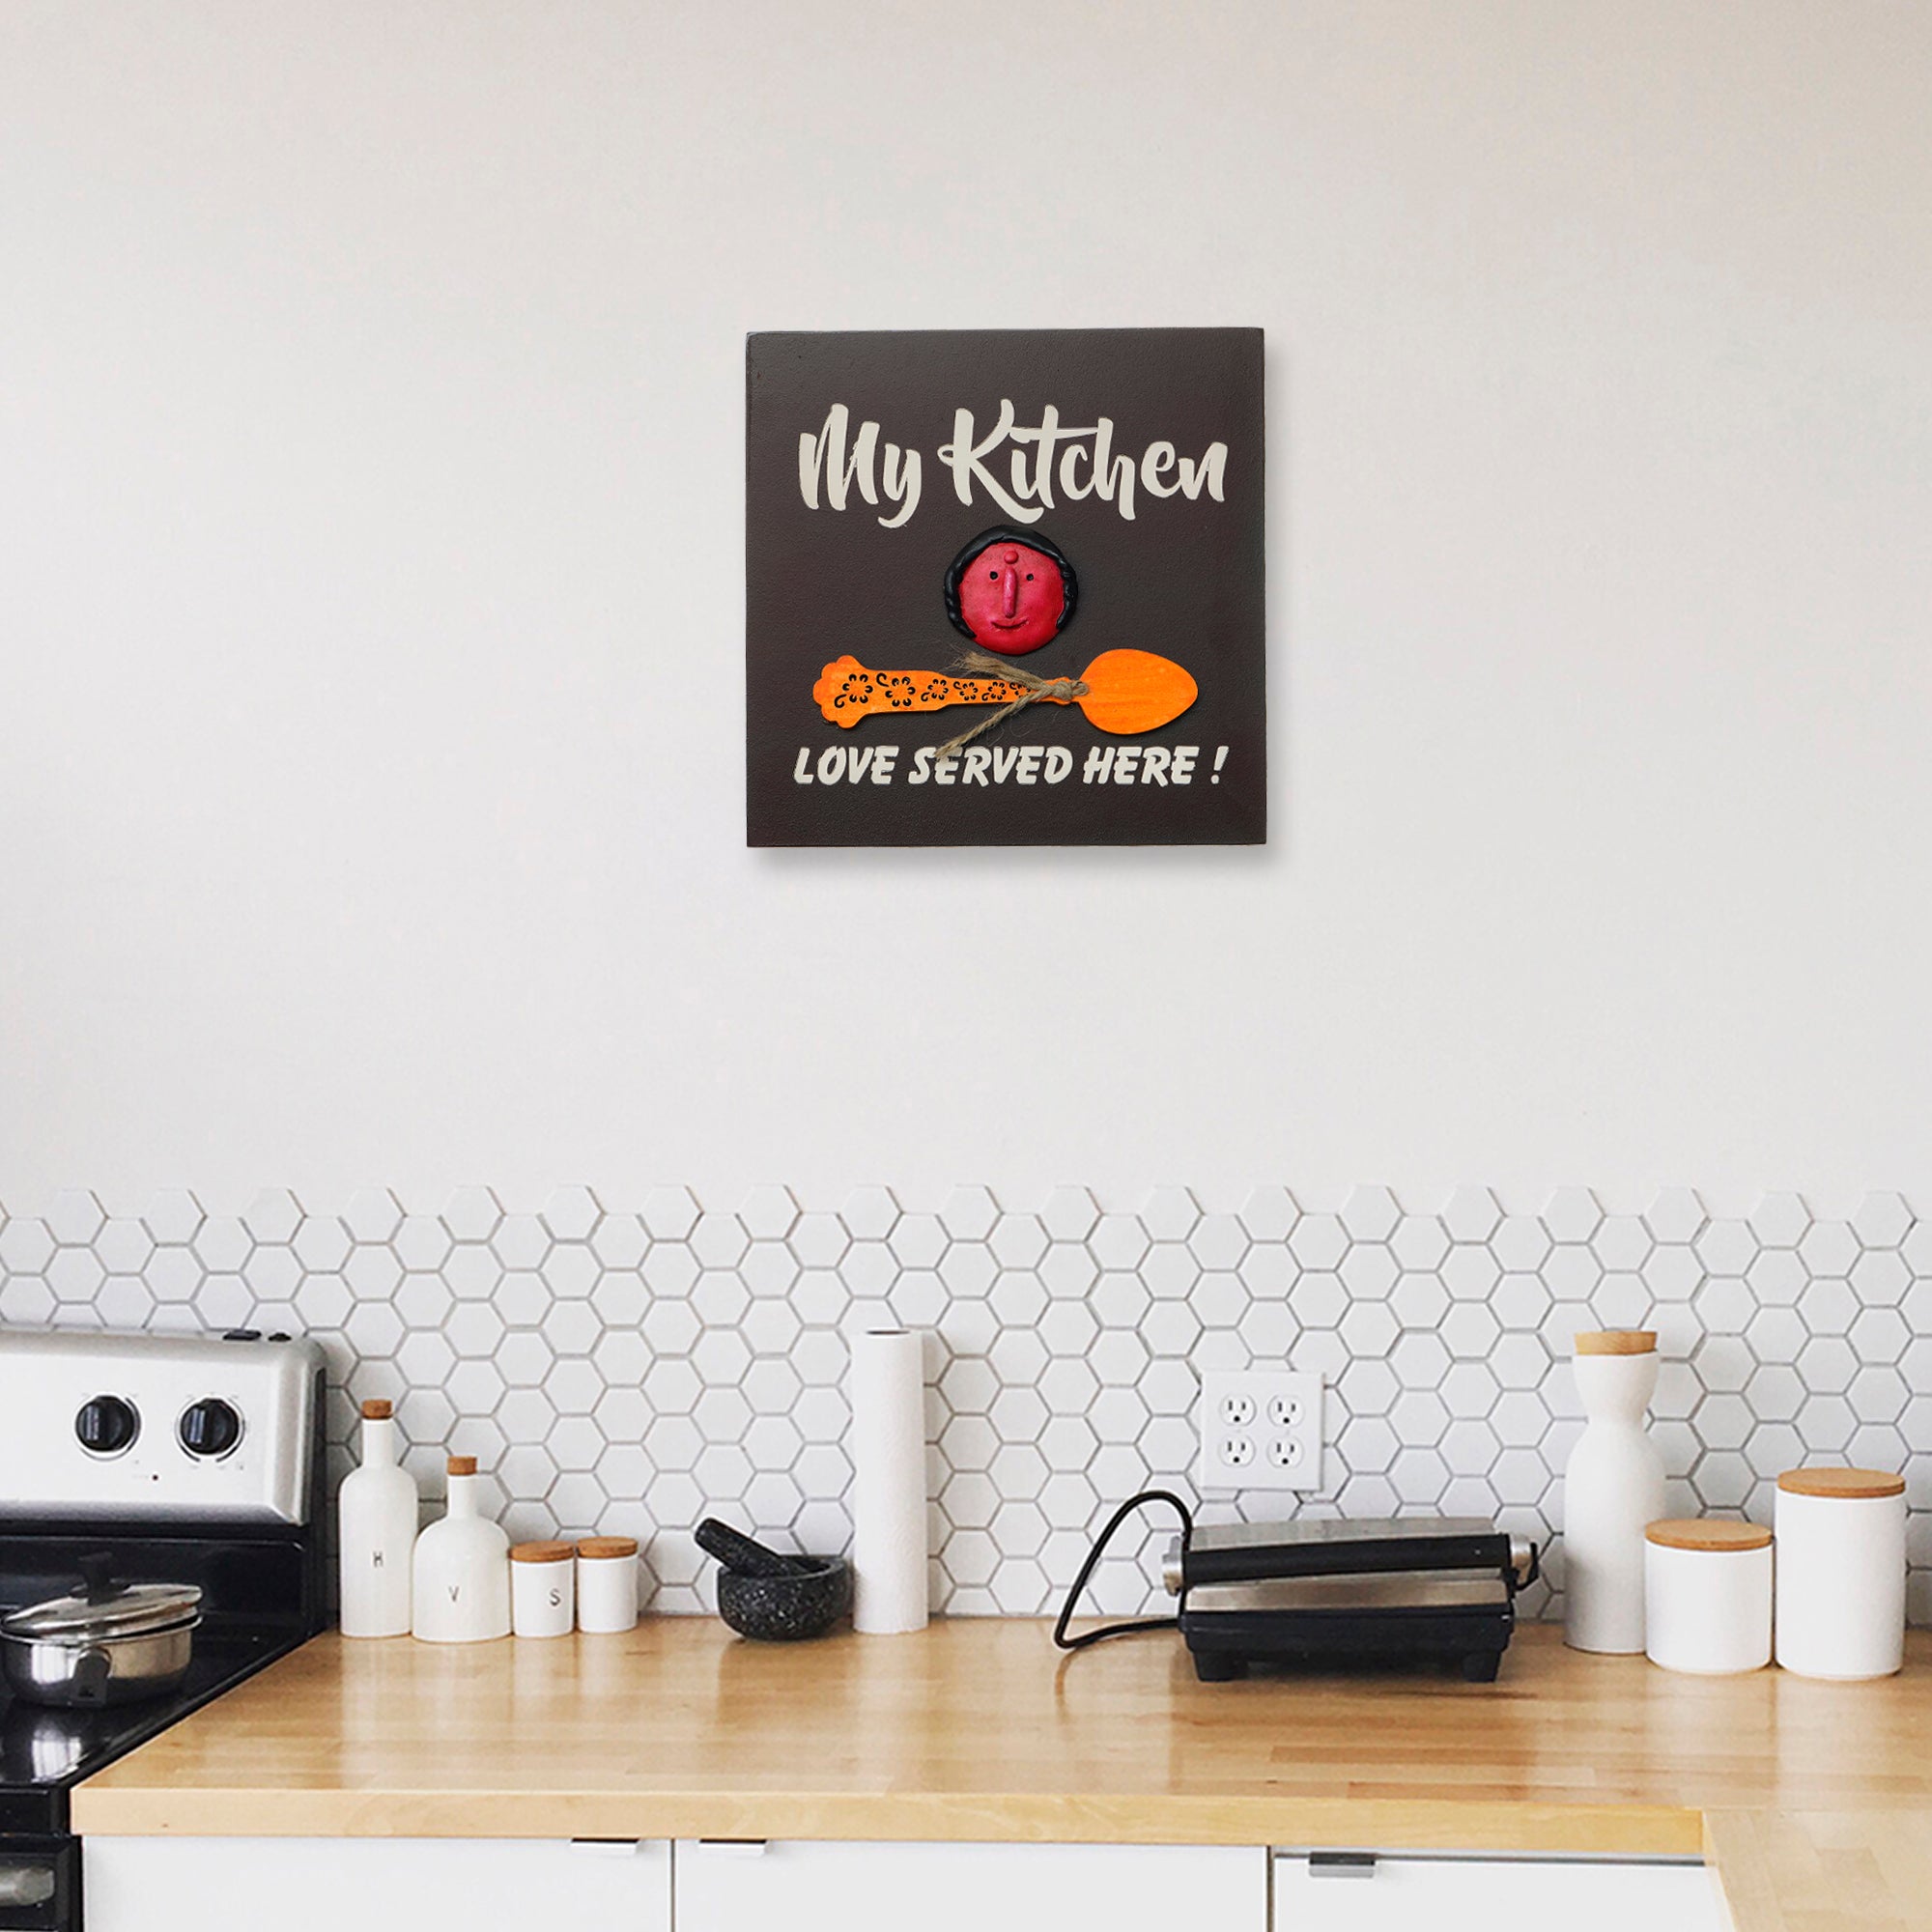 "My Kitchen, Love Served Here!" Mother's Love Theme Decorative Wooden Wall Hanging 1